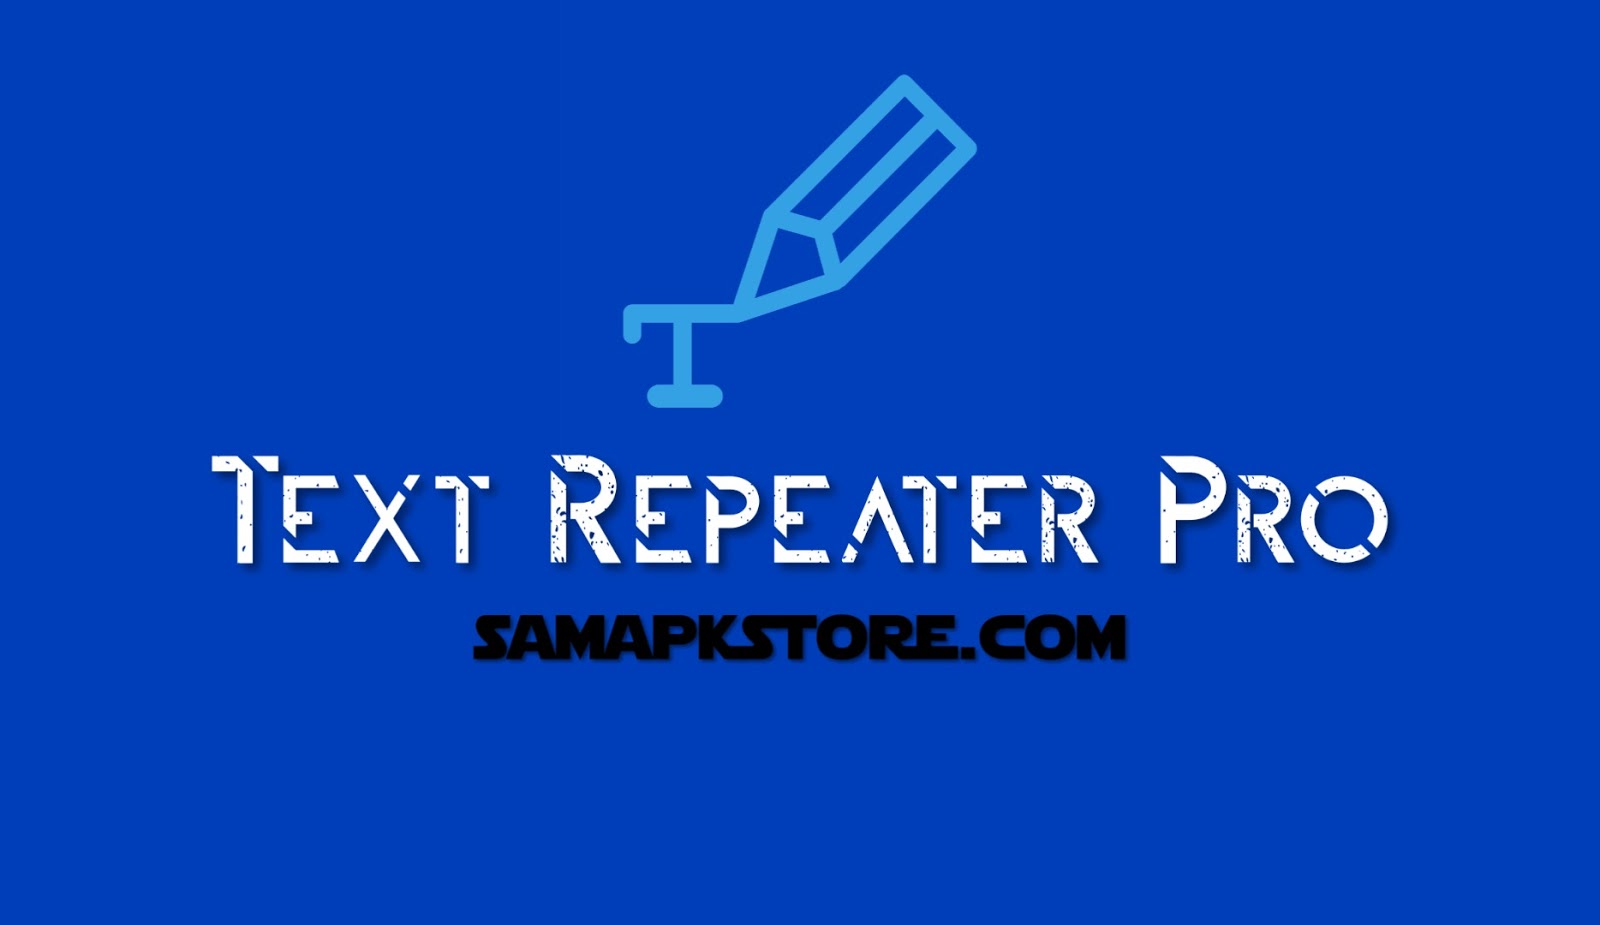 text repeater